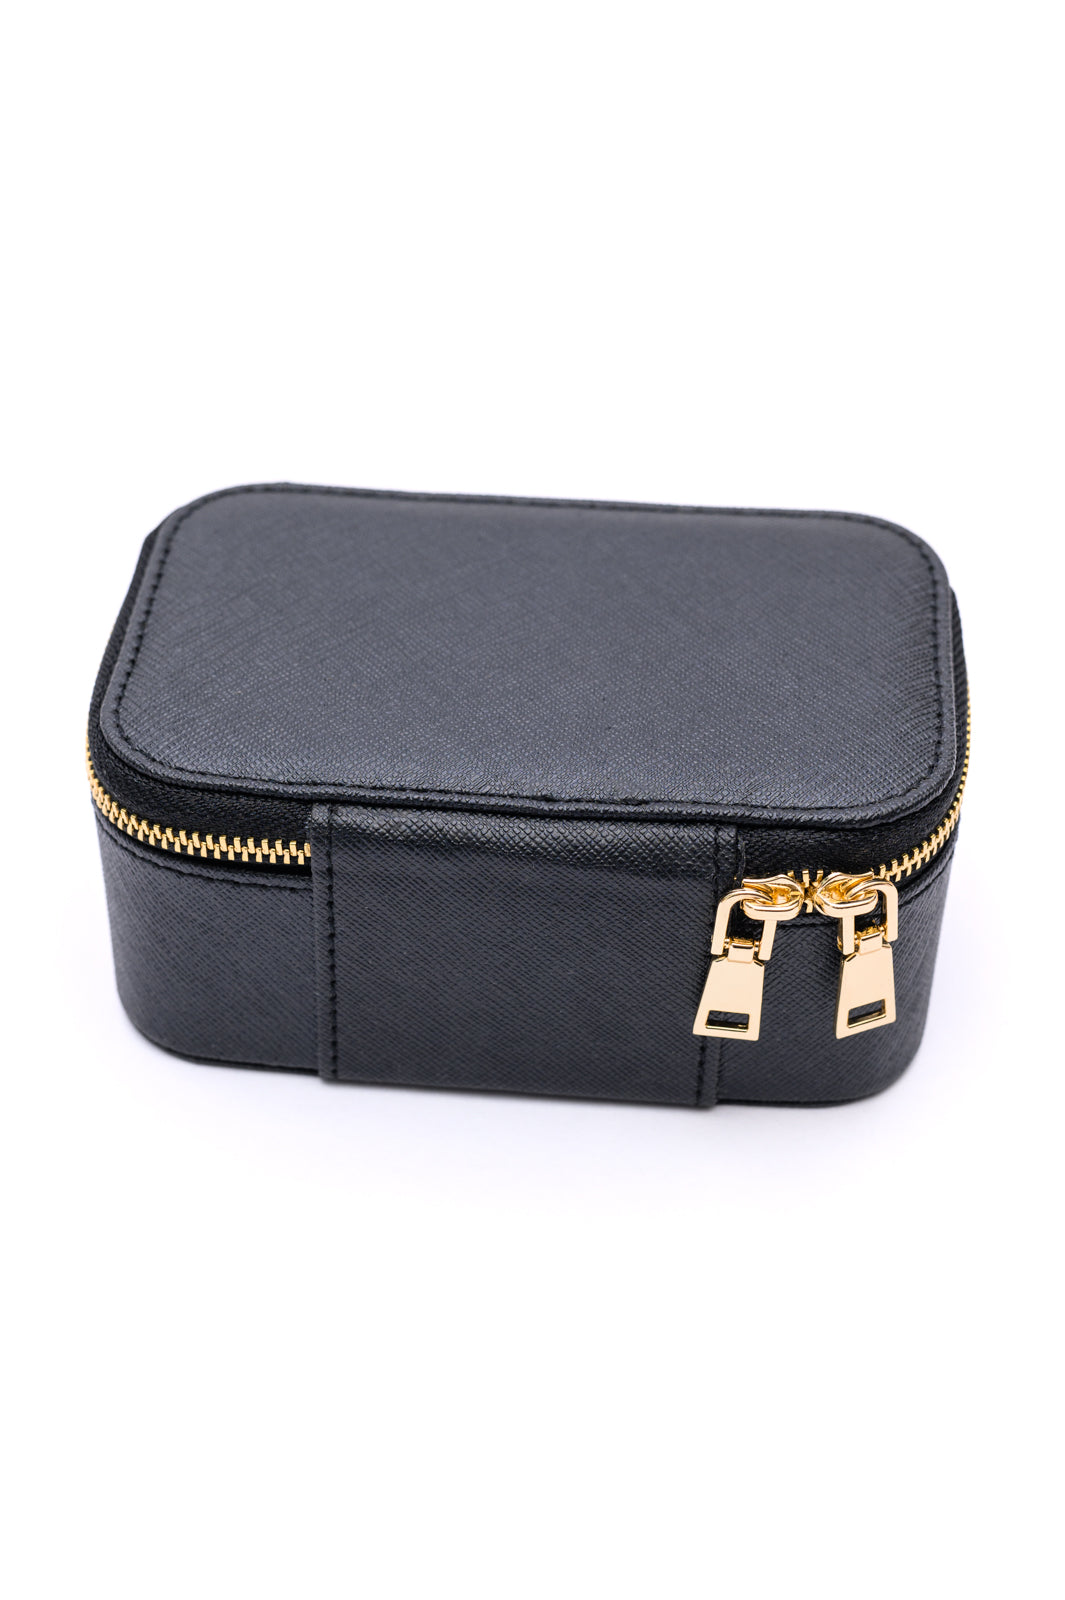 Travel Jewelry Case in Black Ave Shops